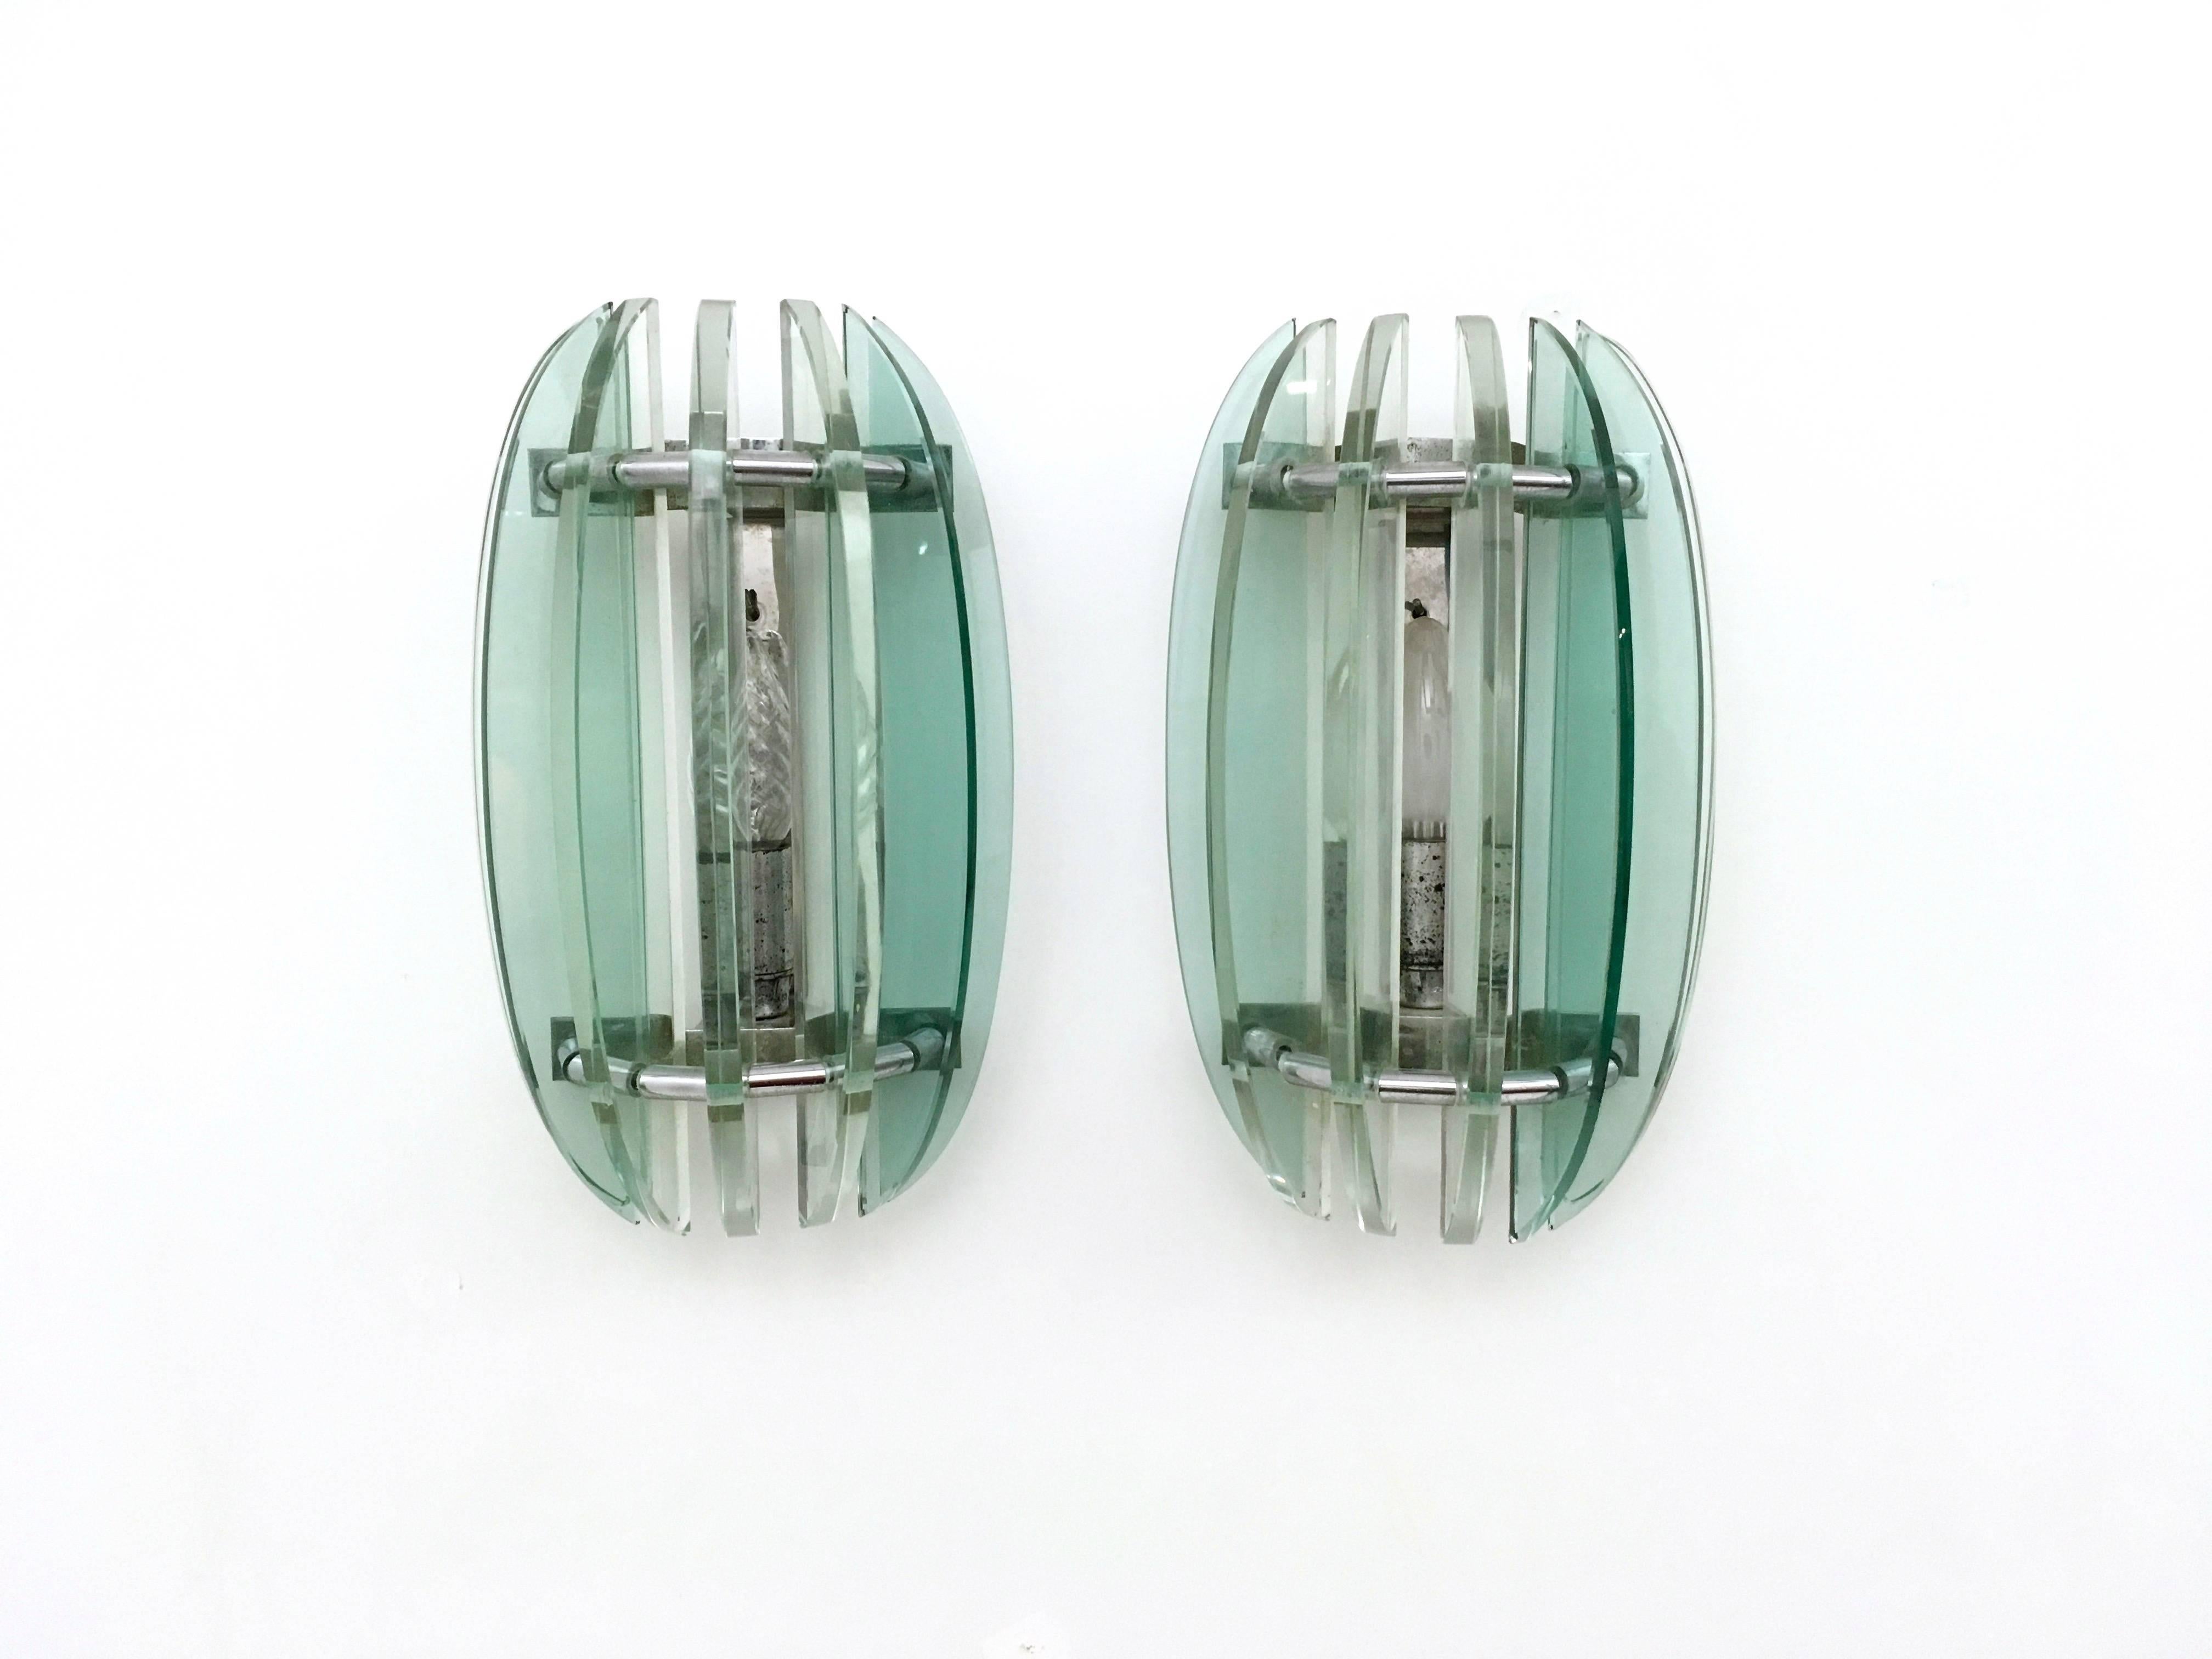 Pair of sconces by Veca, 1970s. Made from glass.